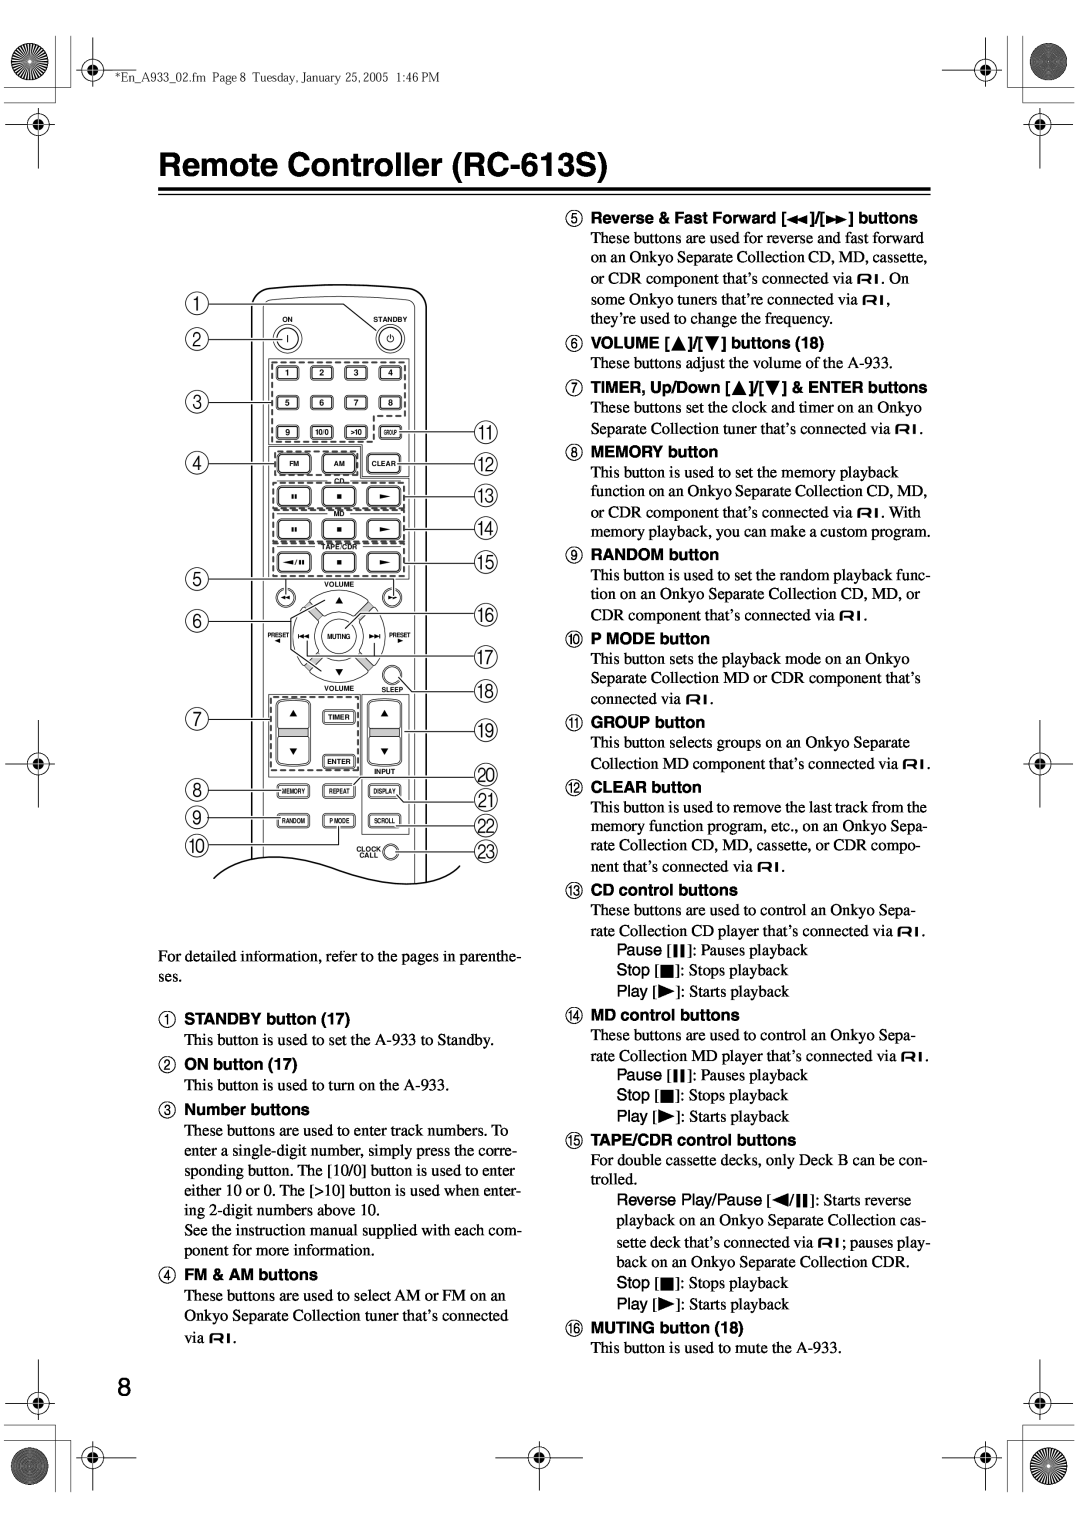 Onkyo A-933 instruction manual Remote Controller RC-613S 